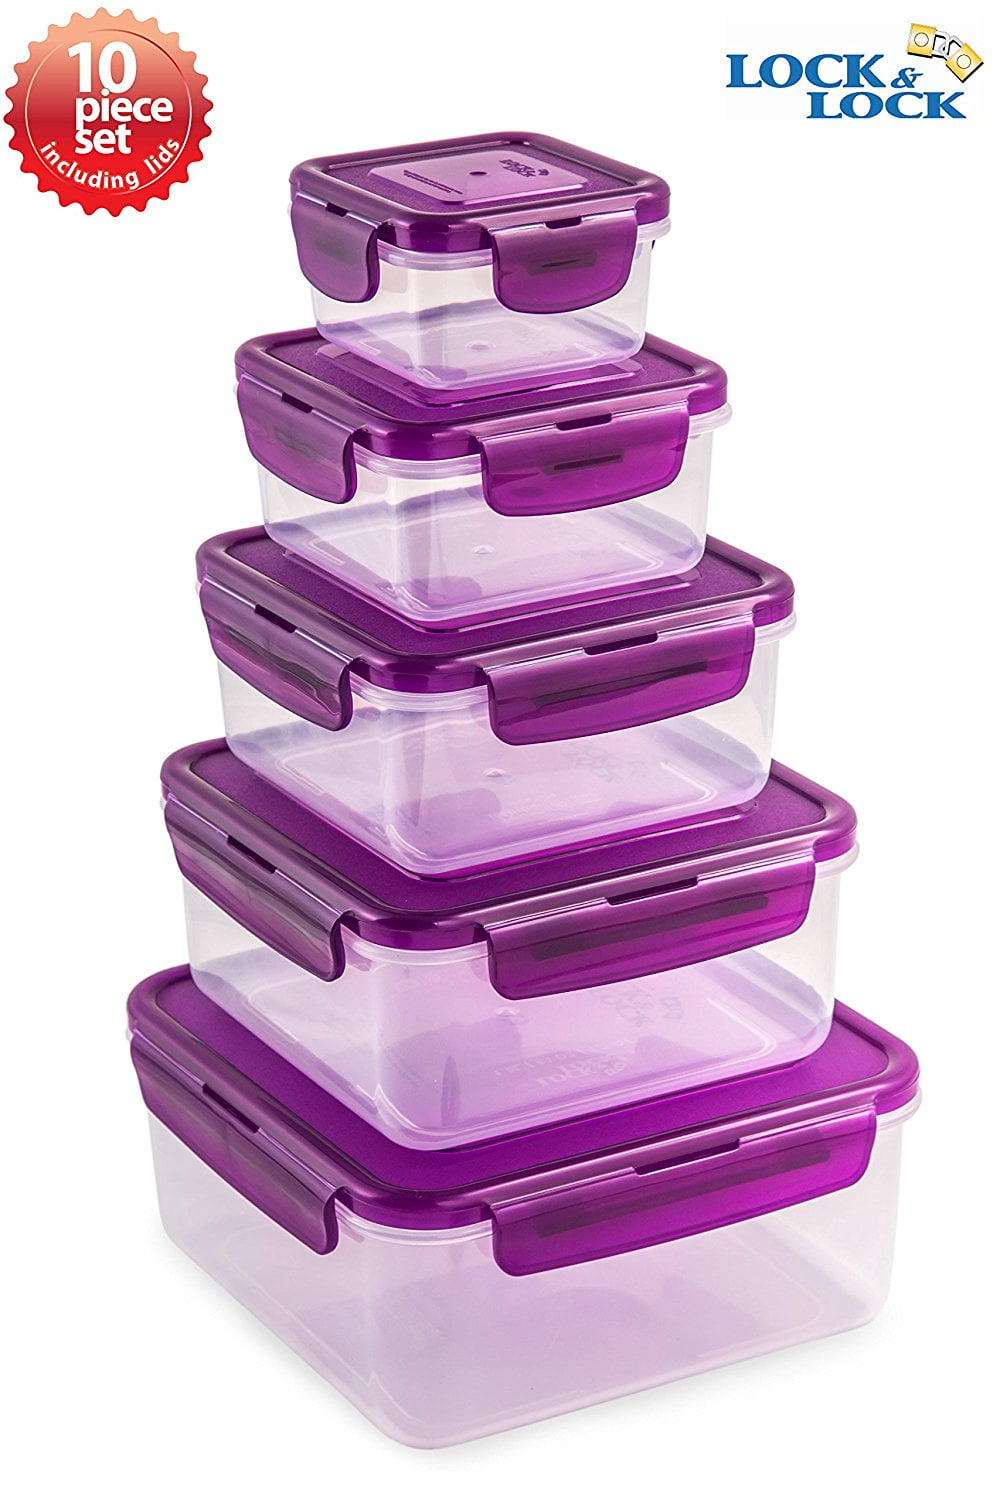 NewTupperware Keep Tabs Nesting Square Storage Containers Set of 5